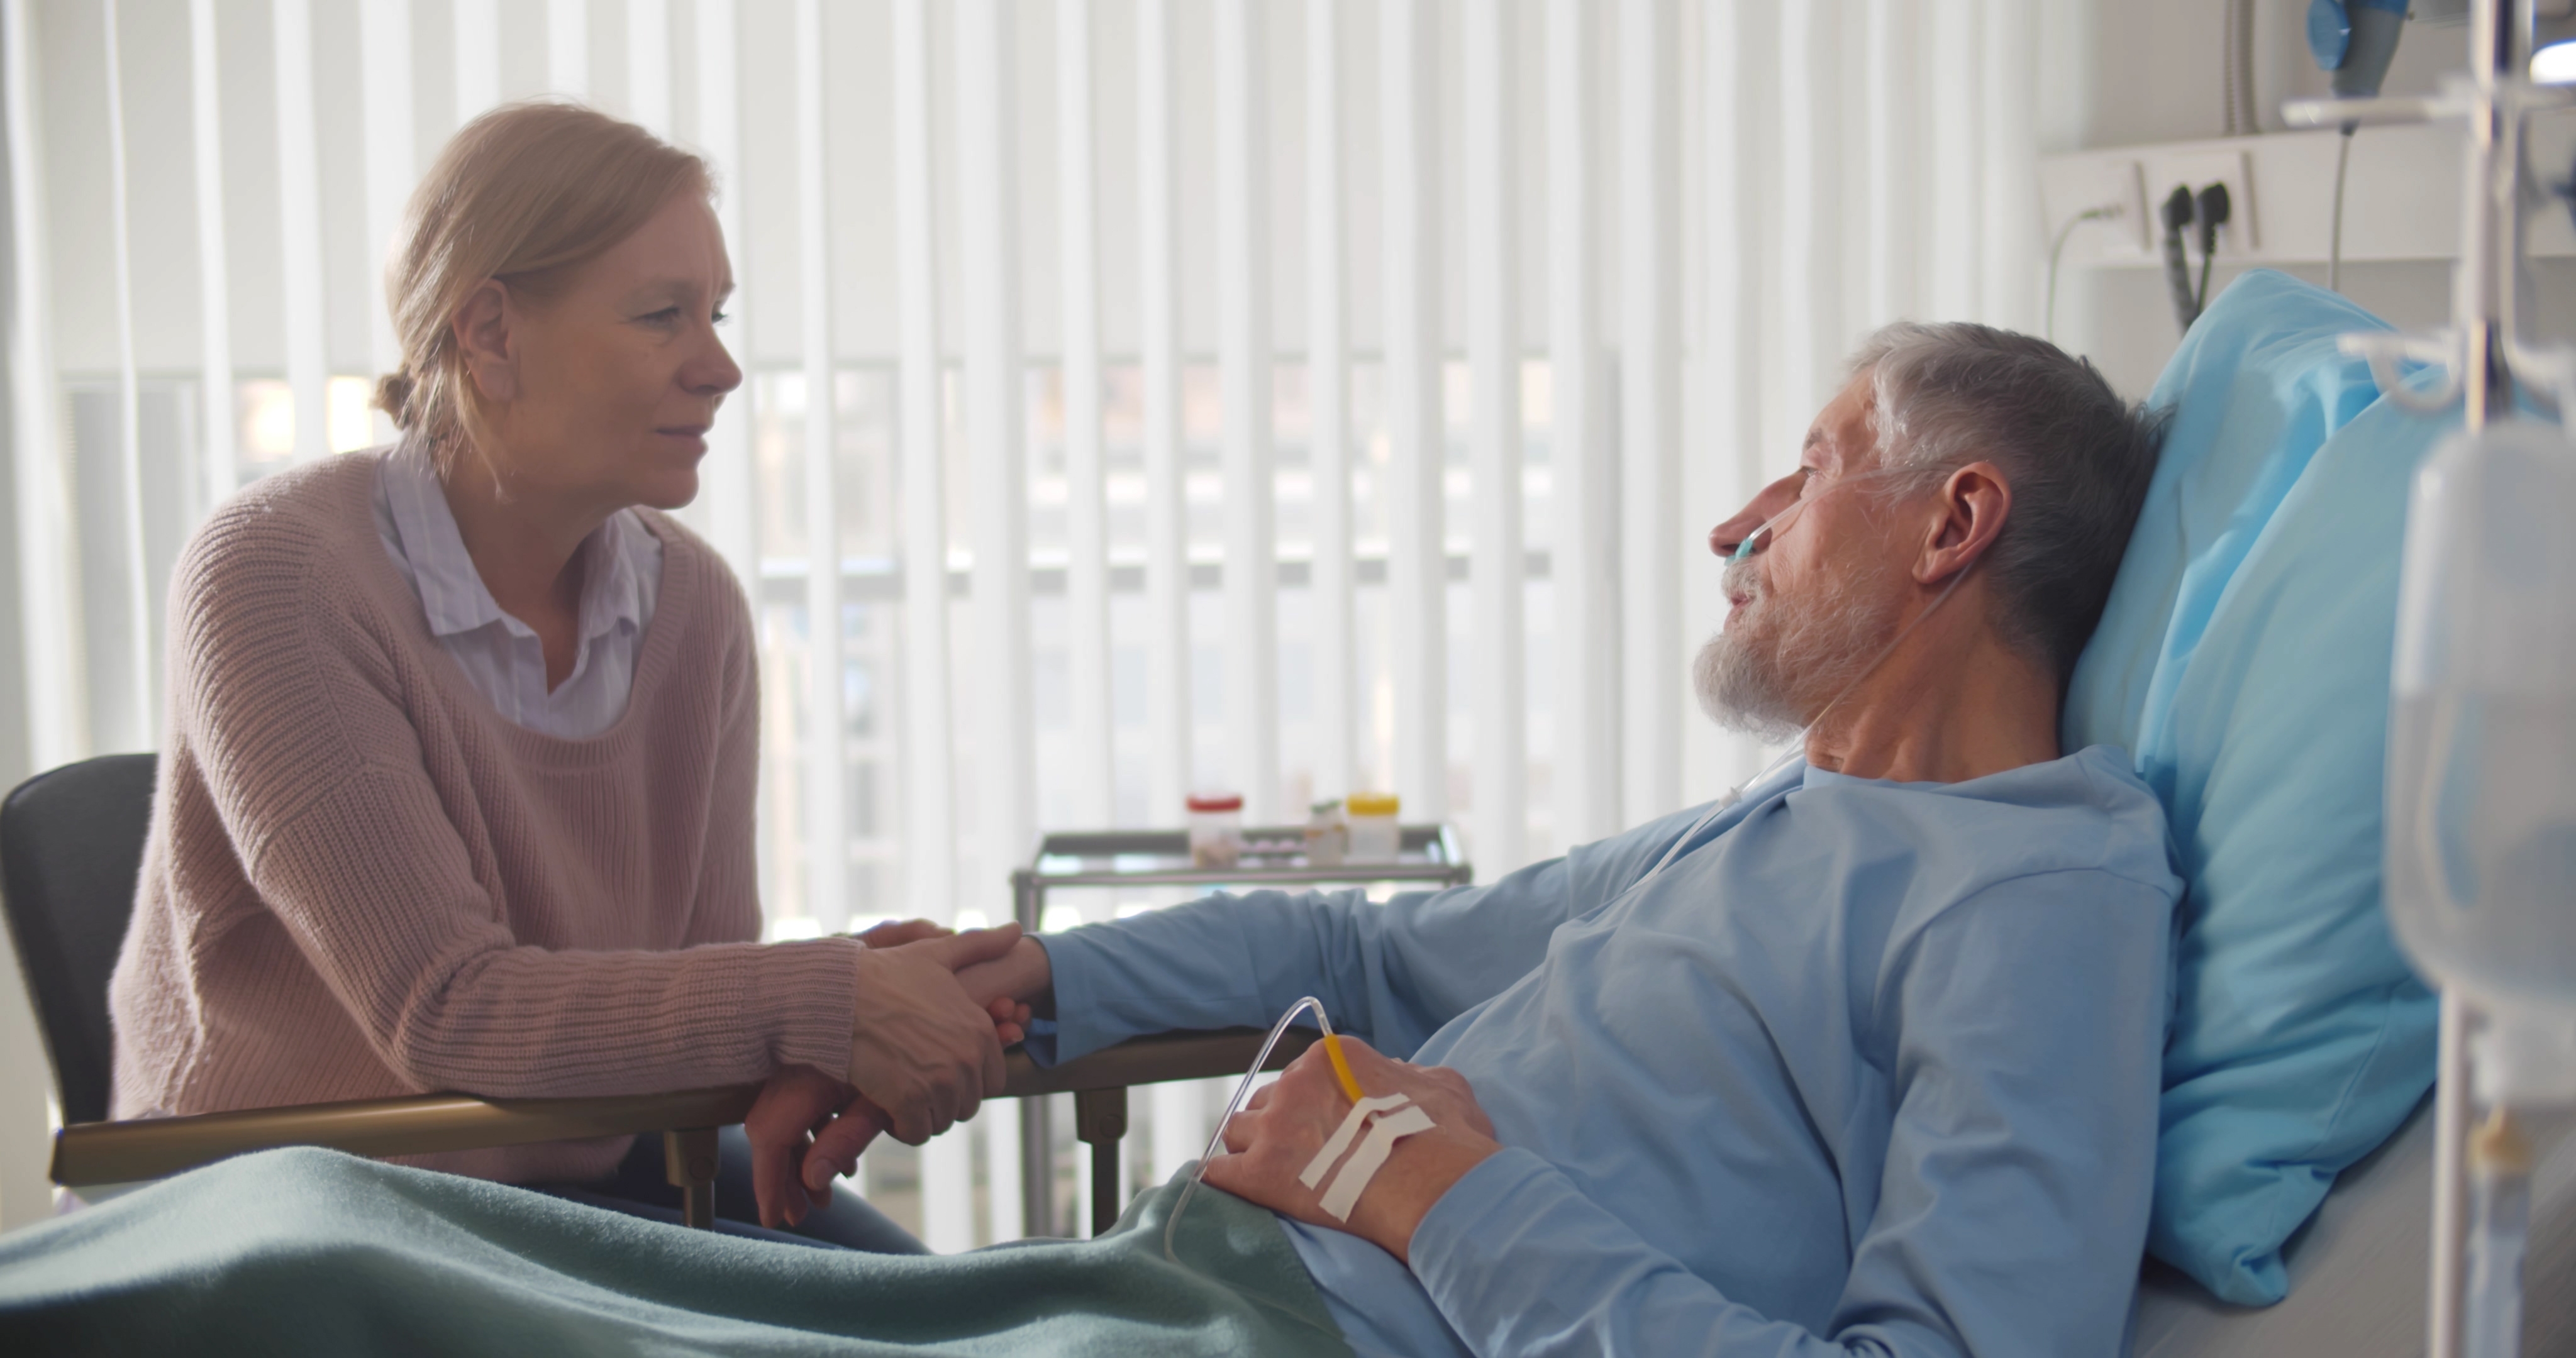 A caring wife holding her ill husband's hand in the hospital | Source: Shutterstock